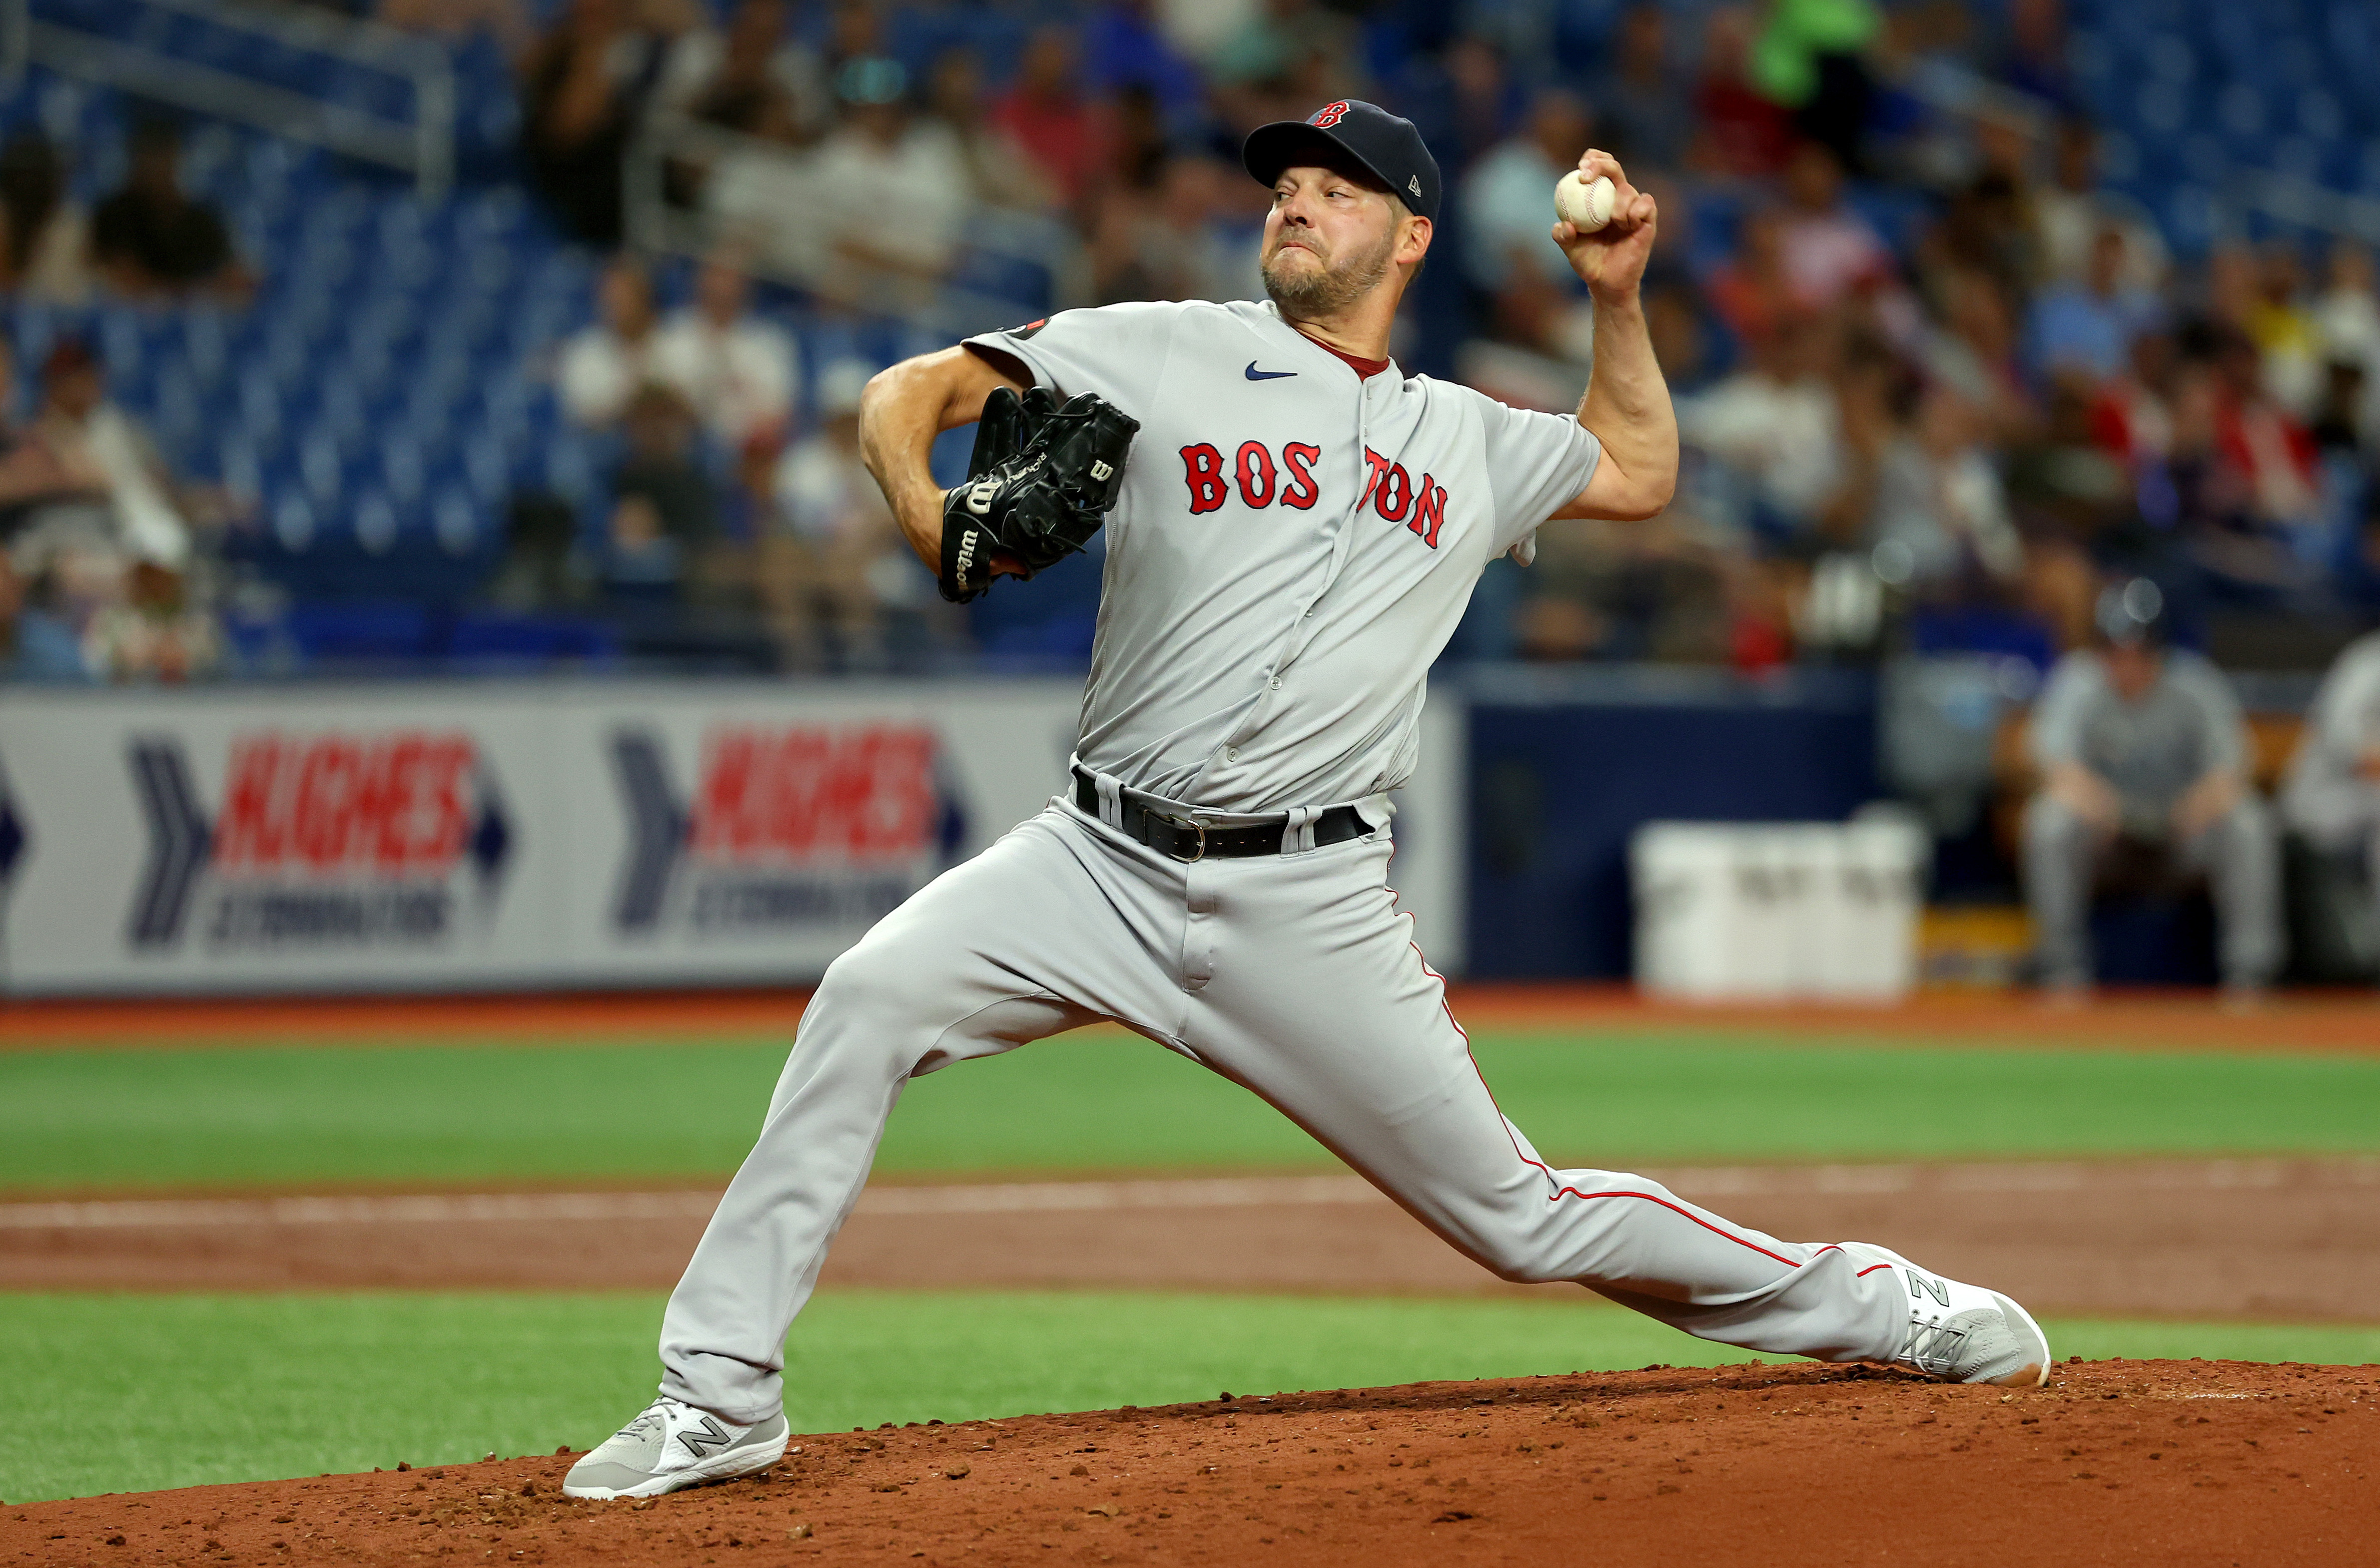 Red Sox rally late against Rays, but can't erase 11-run deficit